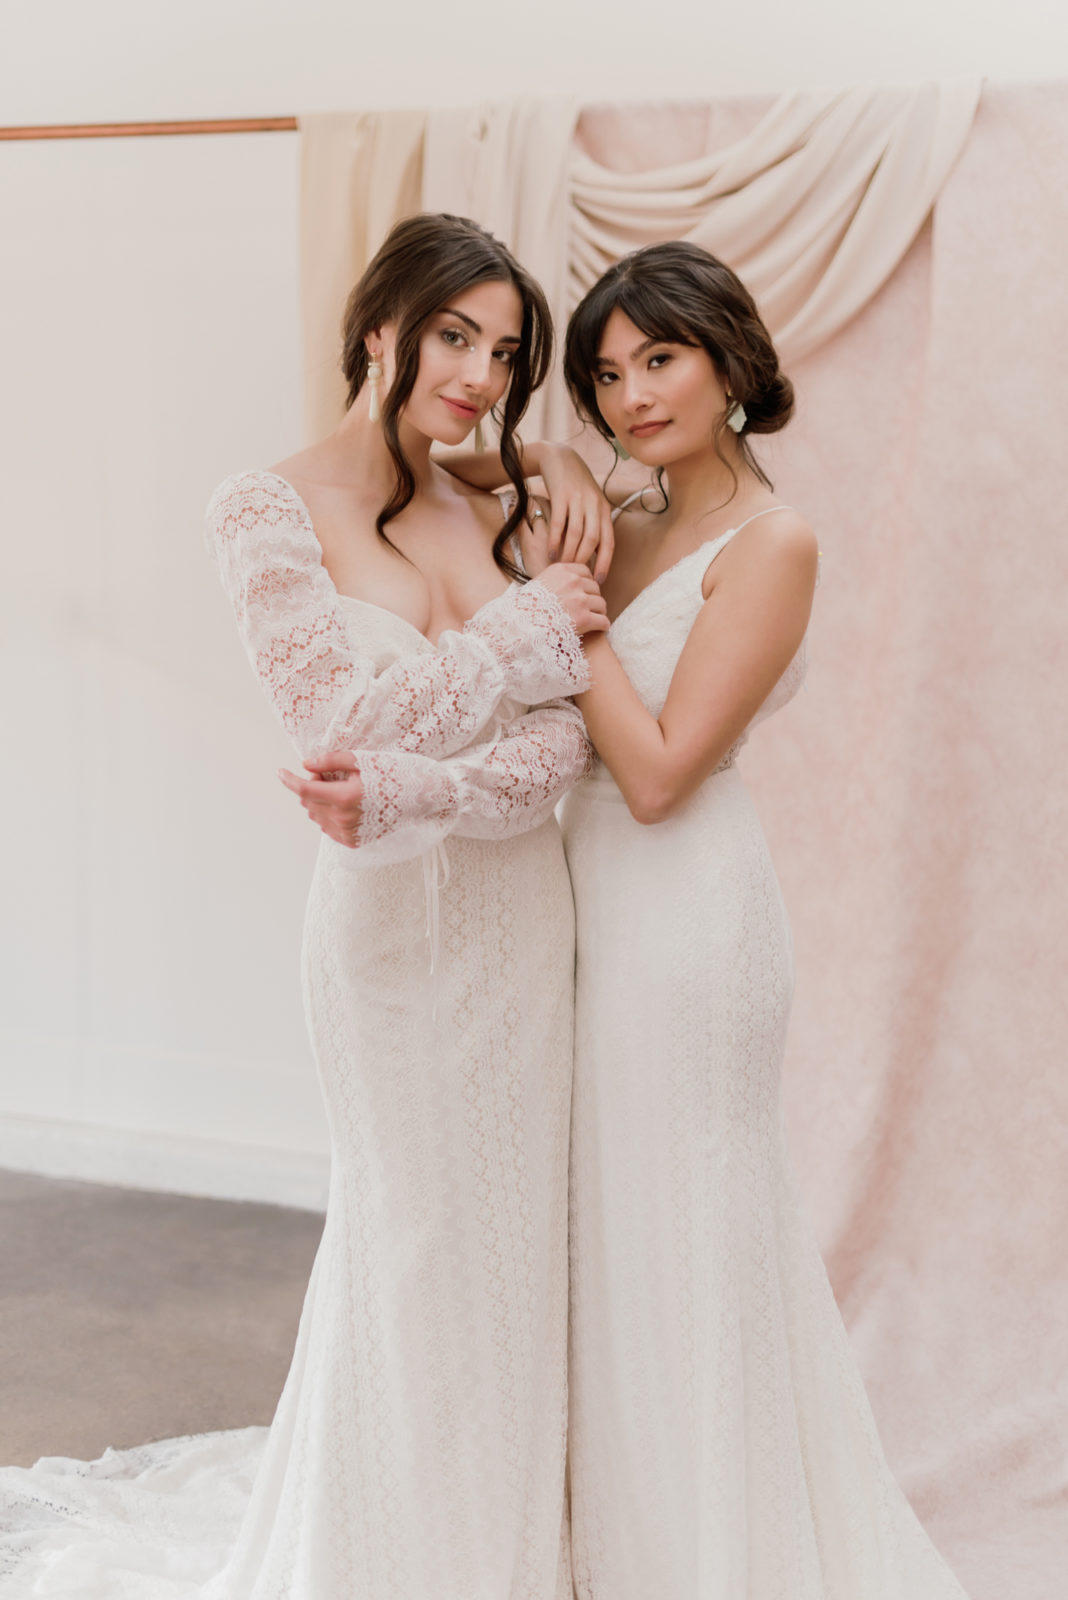 Two models pose together in renaissance inspired wedding gowns at Lovenote Bride in Calgary Alberta